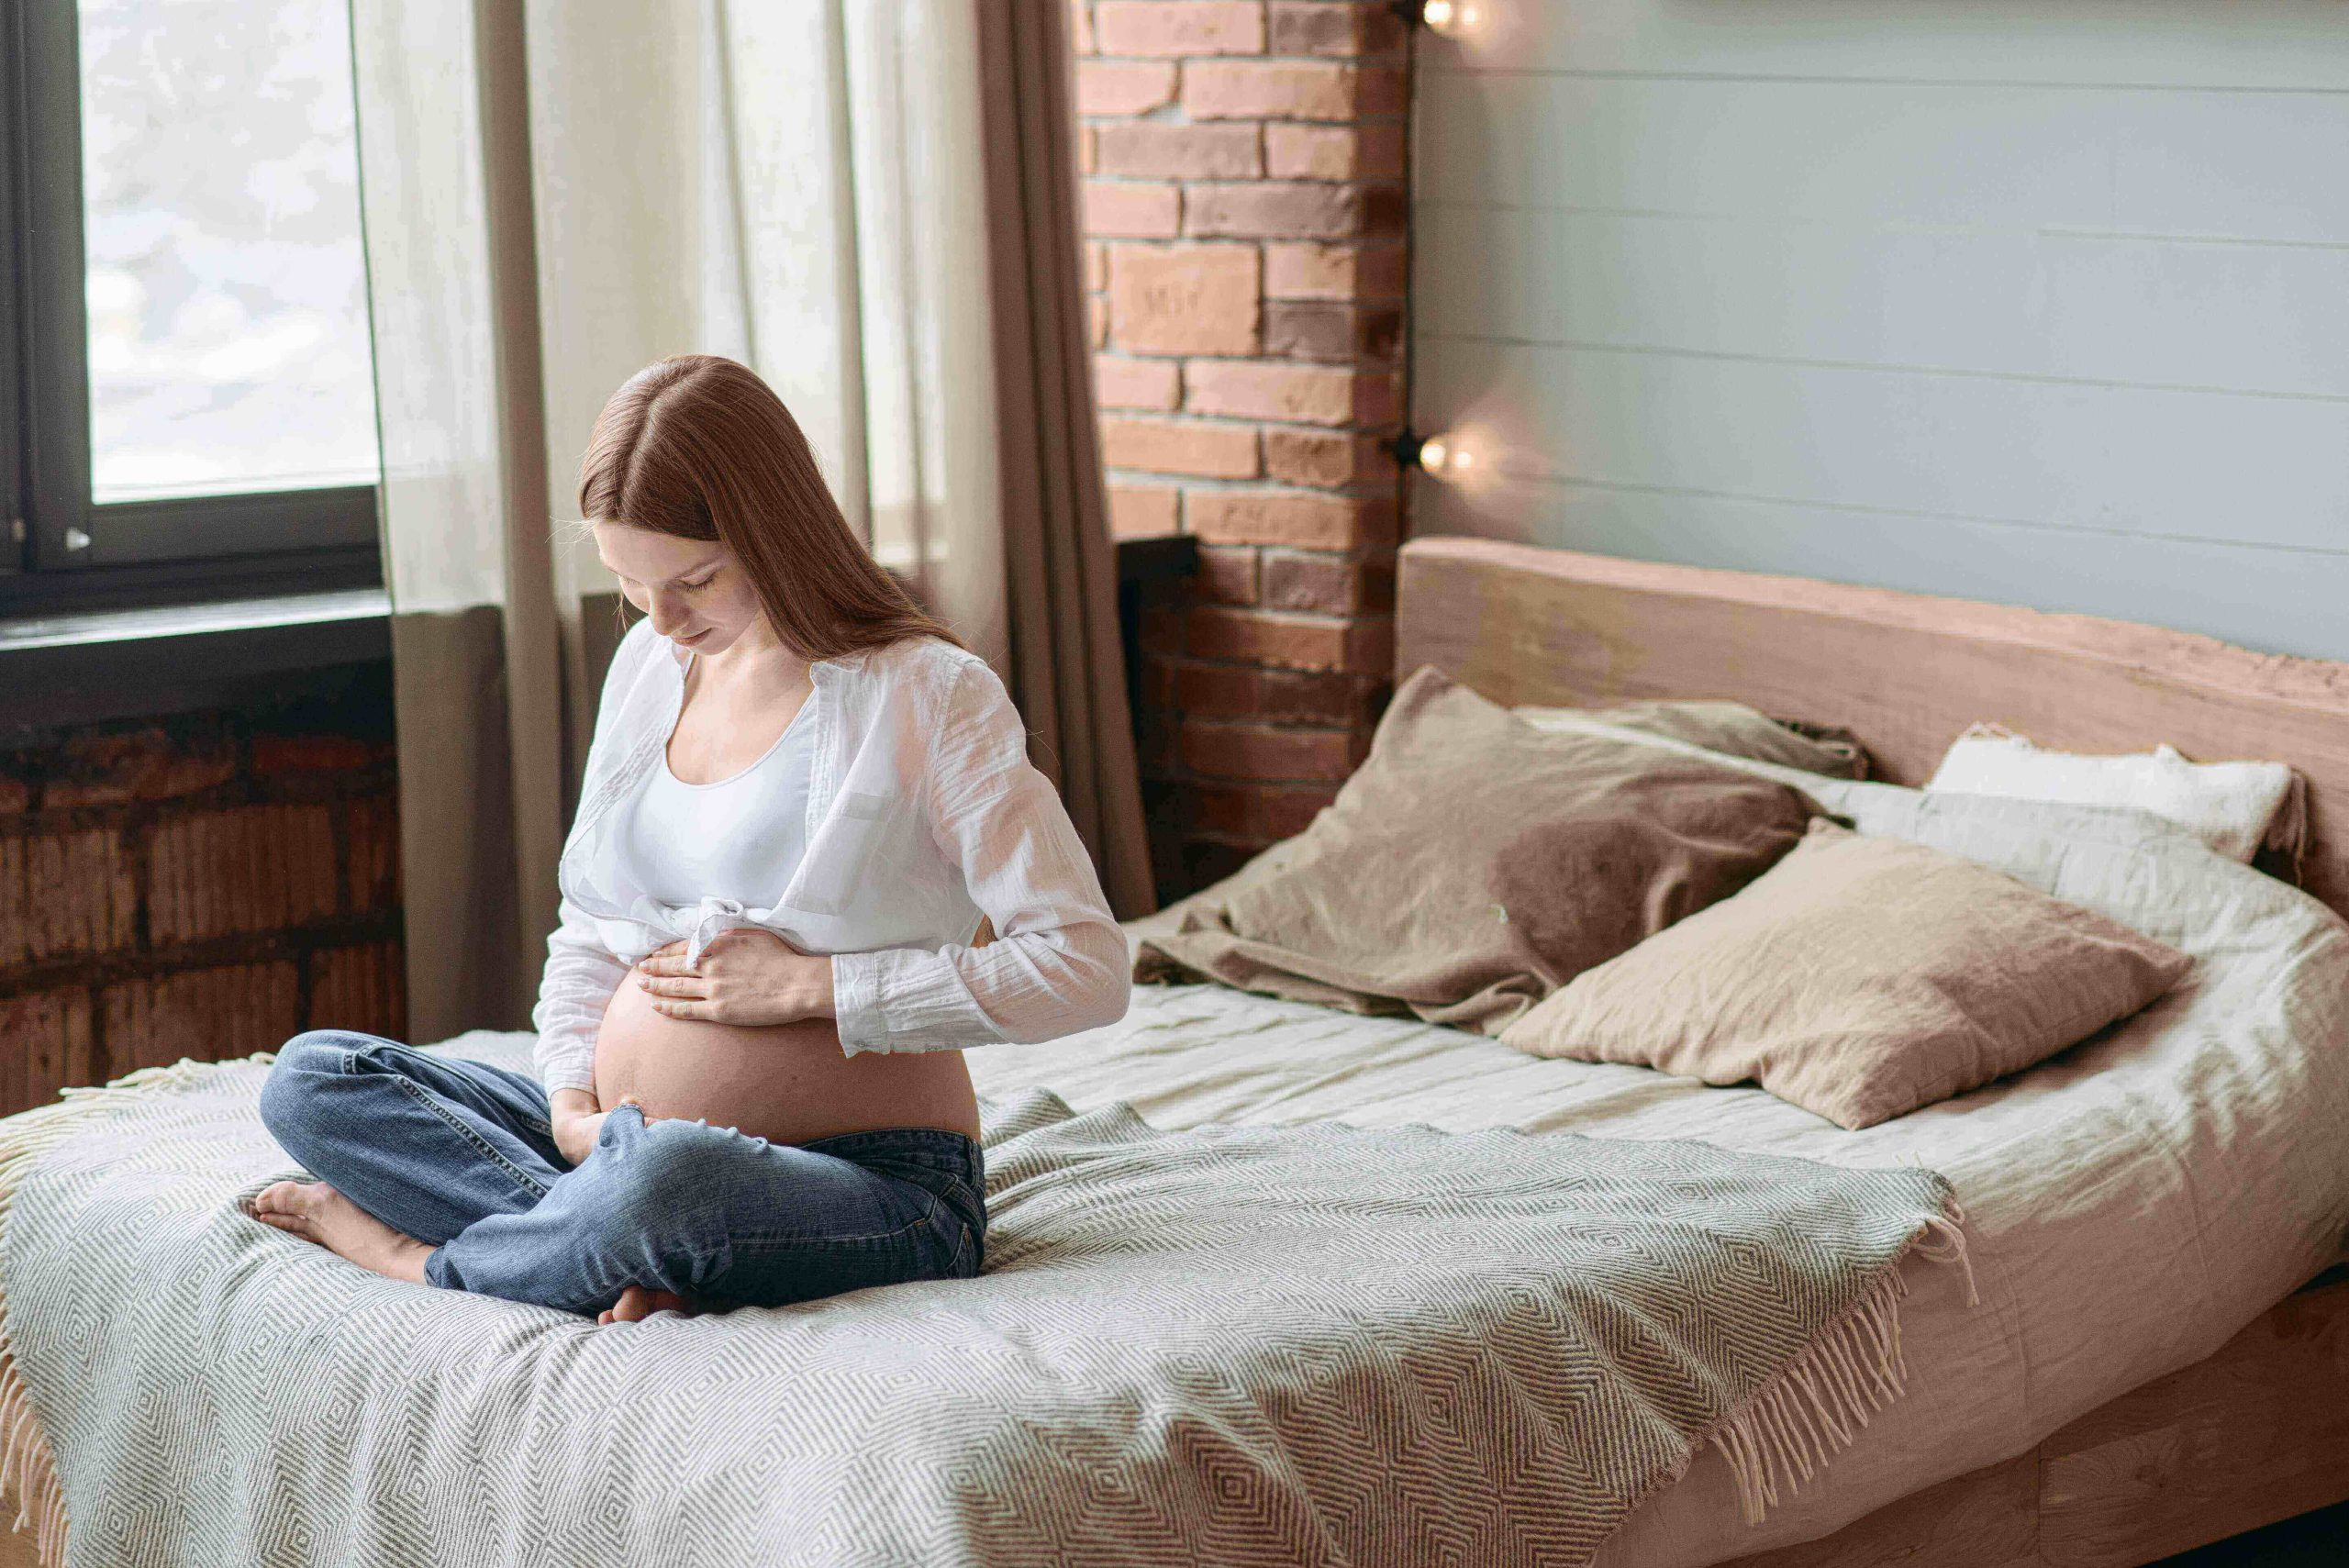 A pregnant woman is sitting on a comfortable mattress